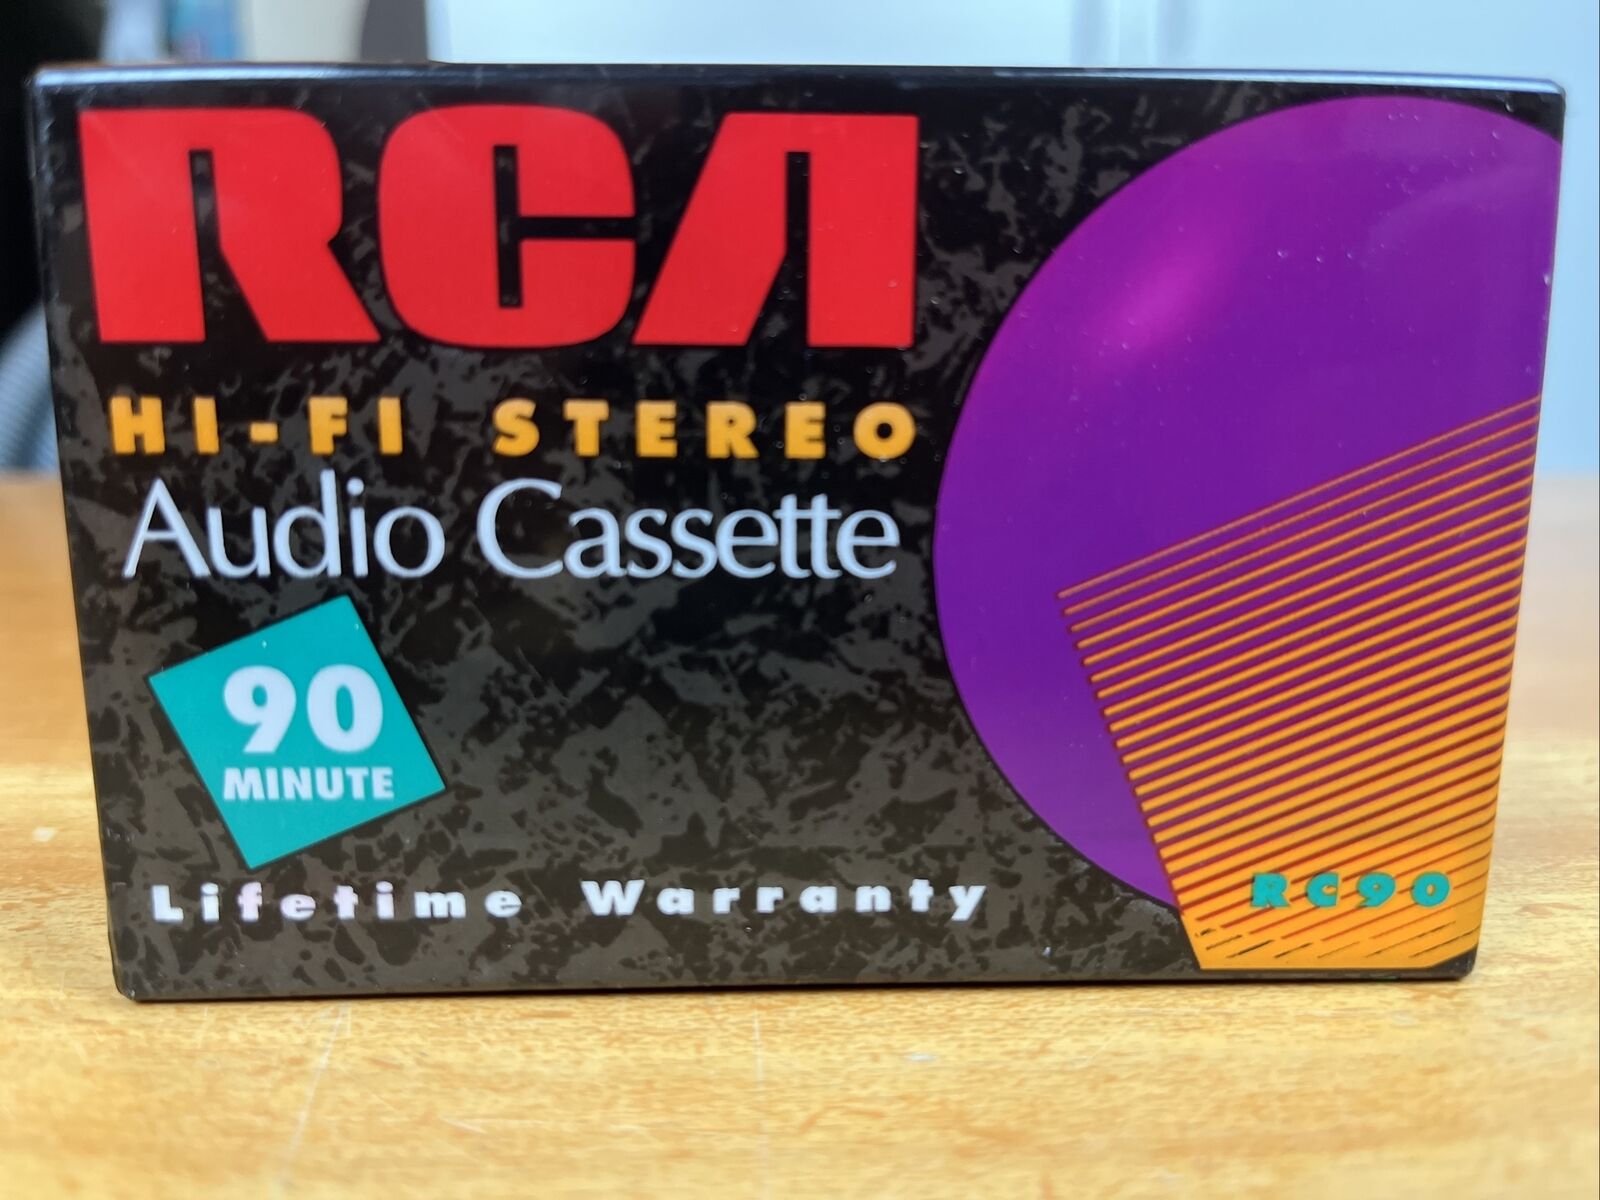 Rca Blank Cassette Tapes Audio-new Sealed-90 Minute Hi-fi